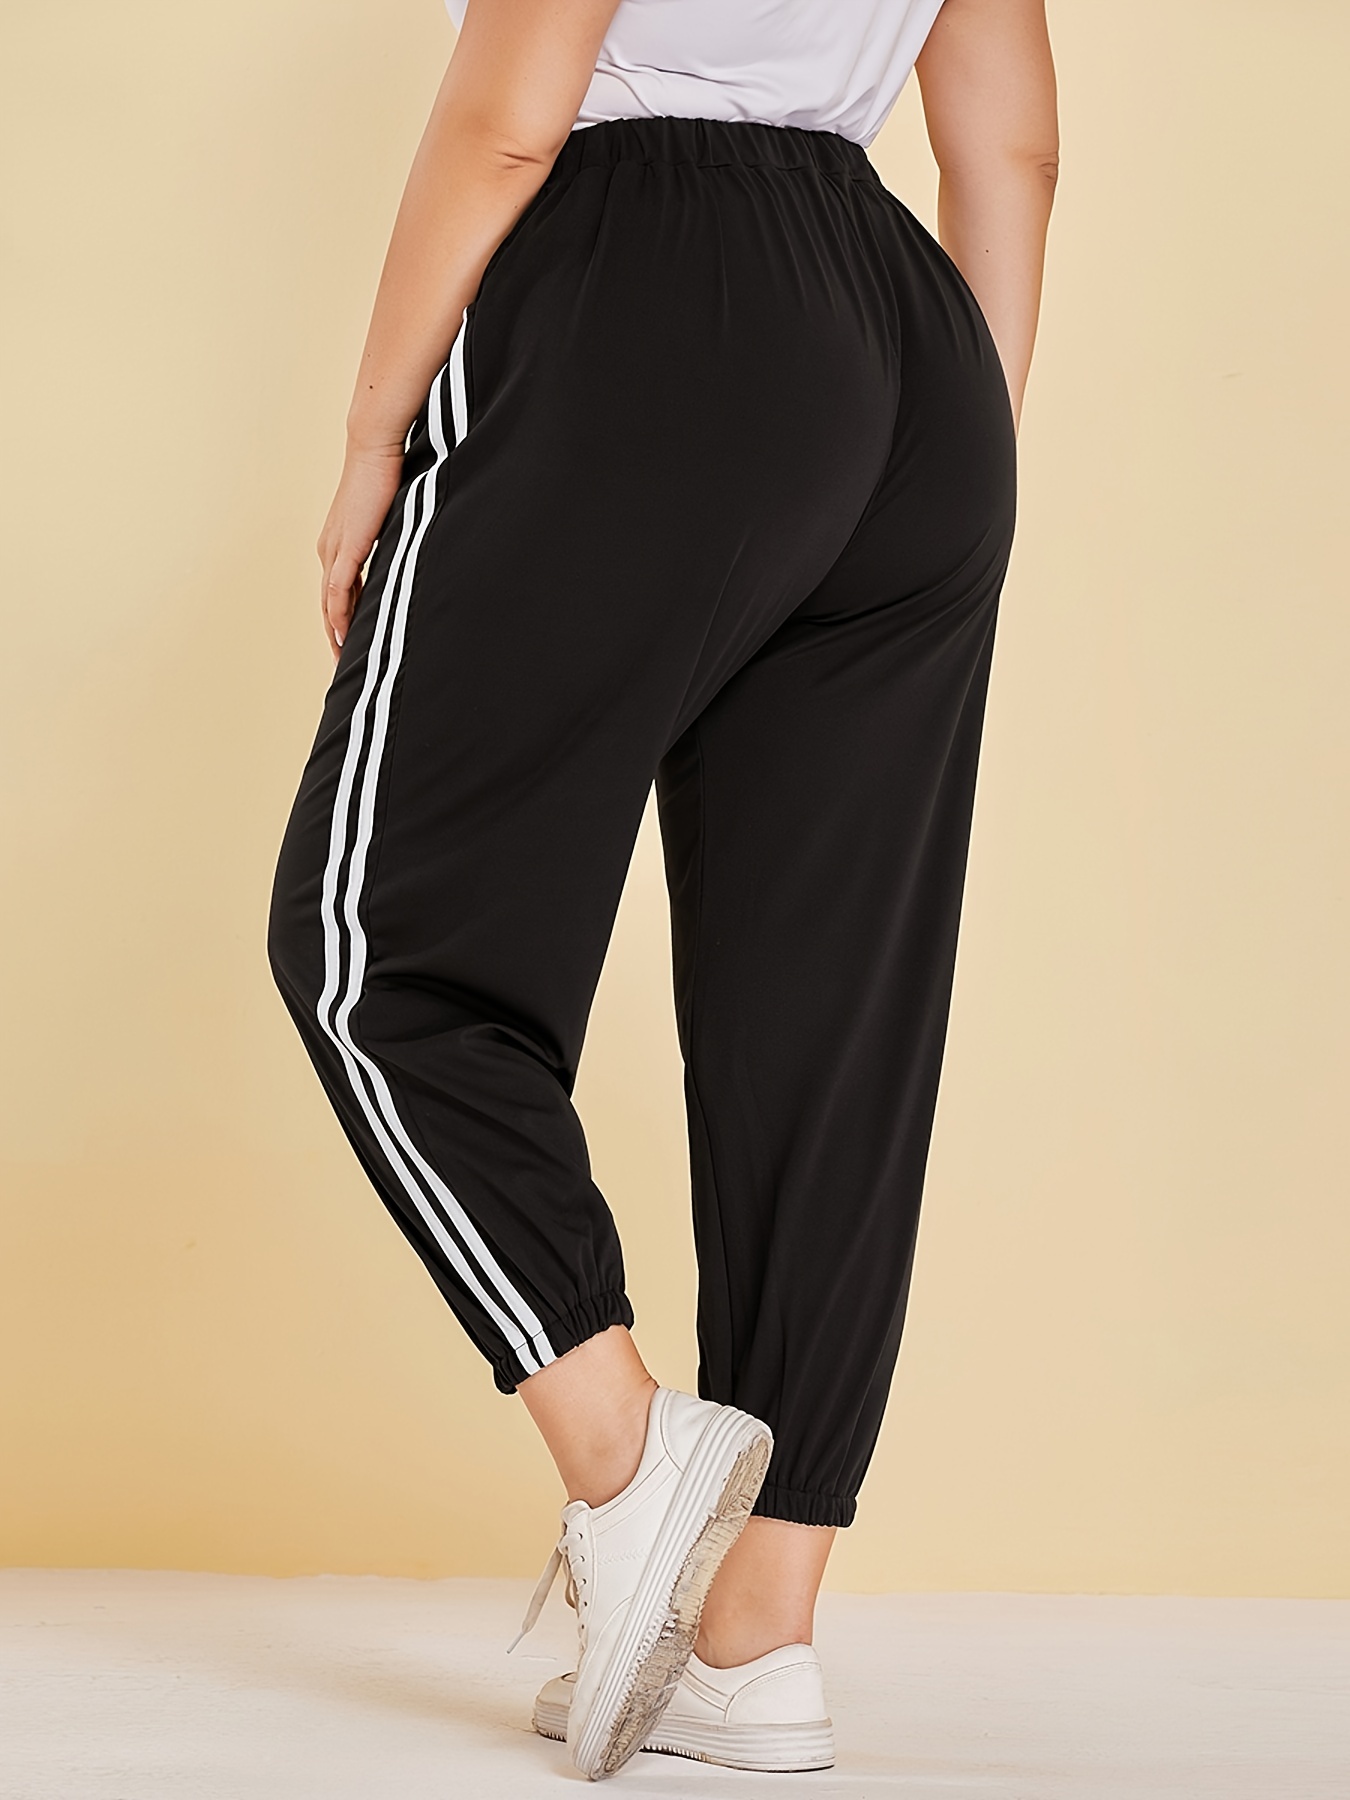 Womens Sweatpants Tall 34 Inseam Long Ladies Casual Trousers Solid Color  Stitching Pocket Lace Up Pants Women Fashion Leggings for Women Pack Plus  Size Sweatpants for Women with Pockets Plus Size 